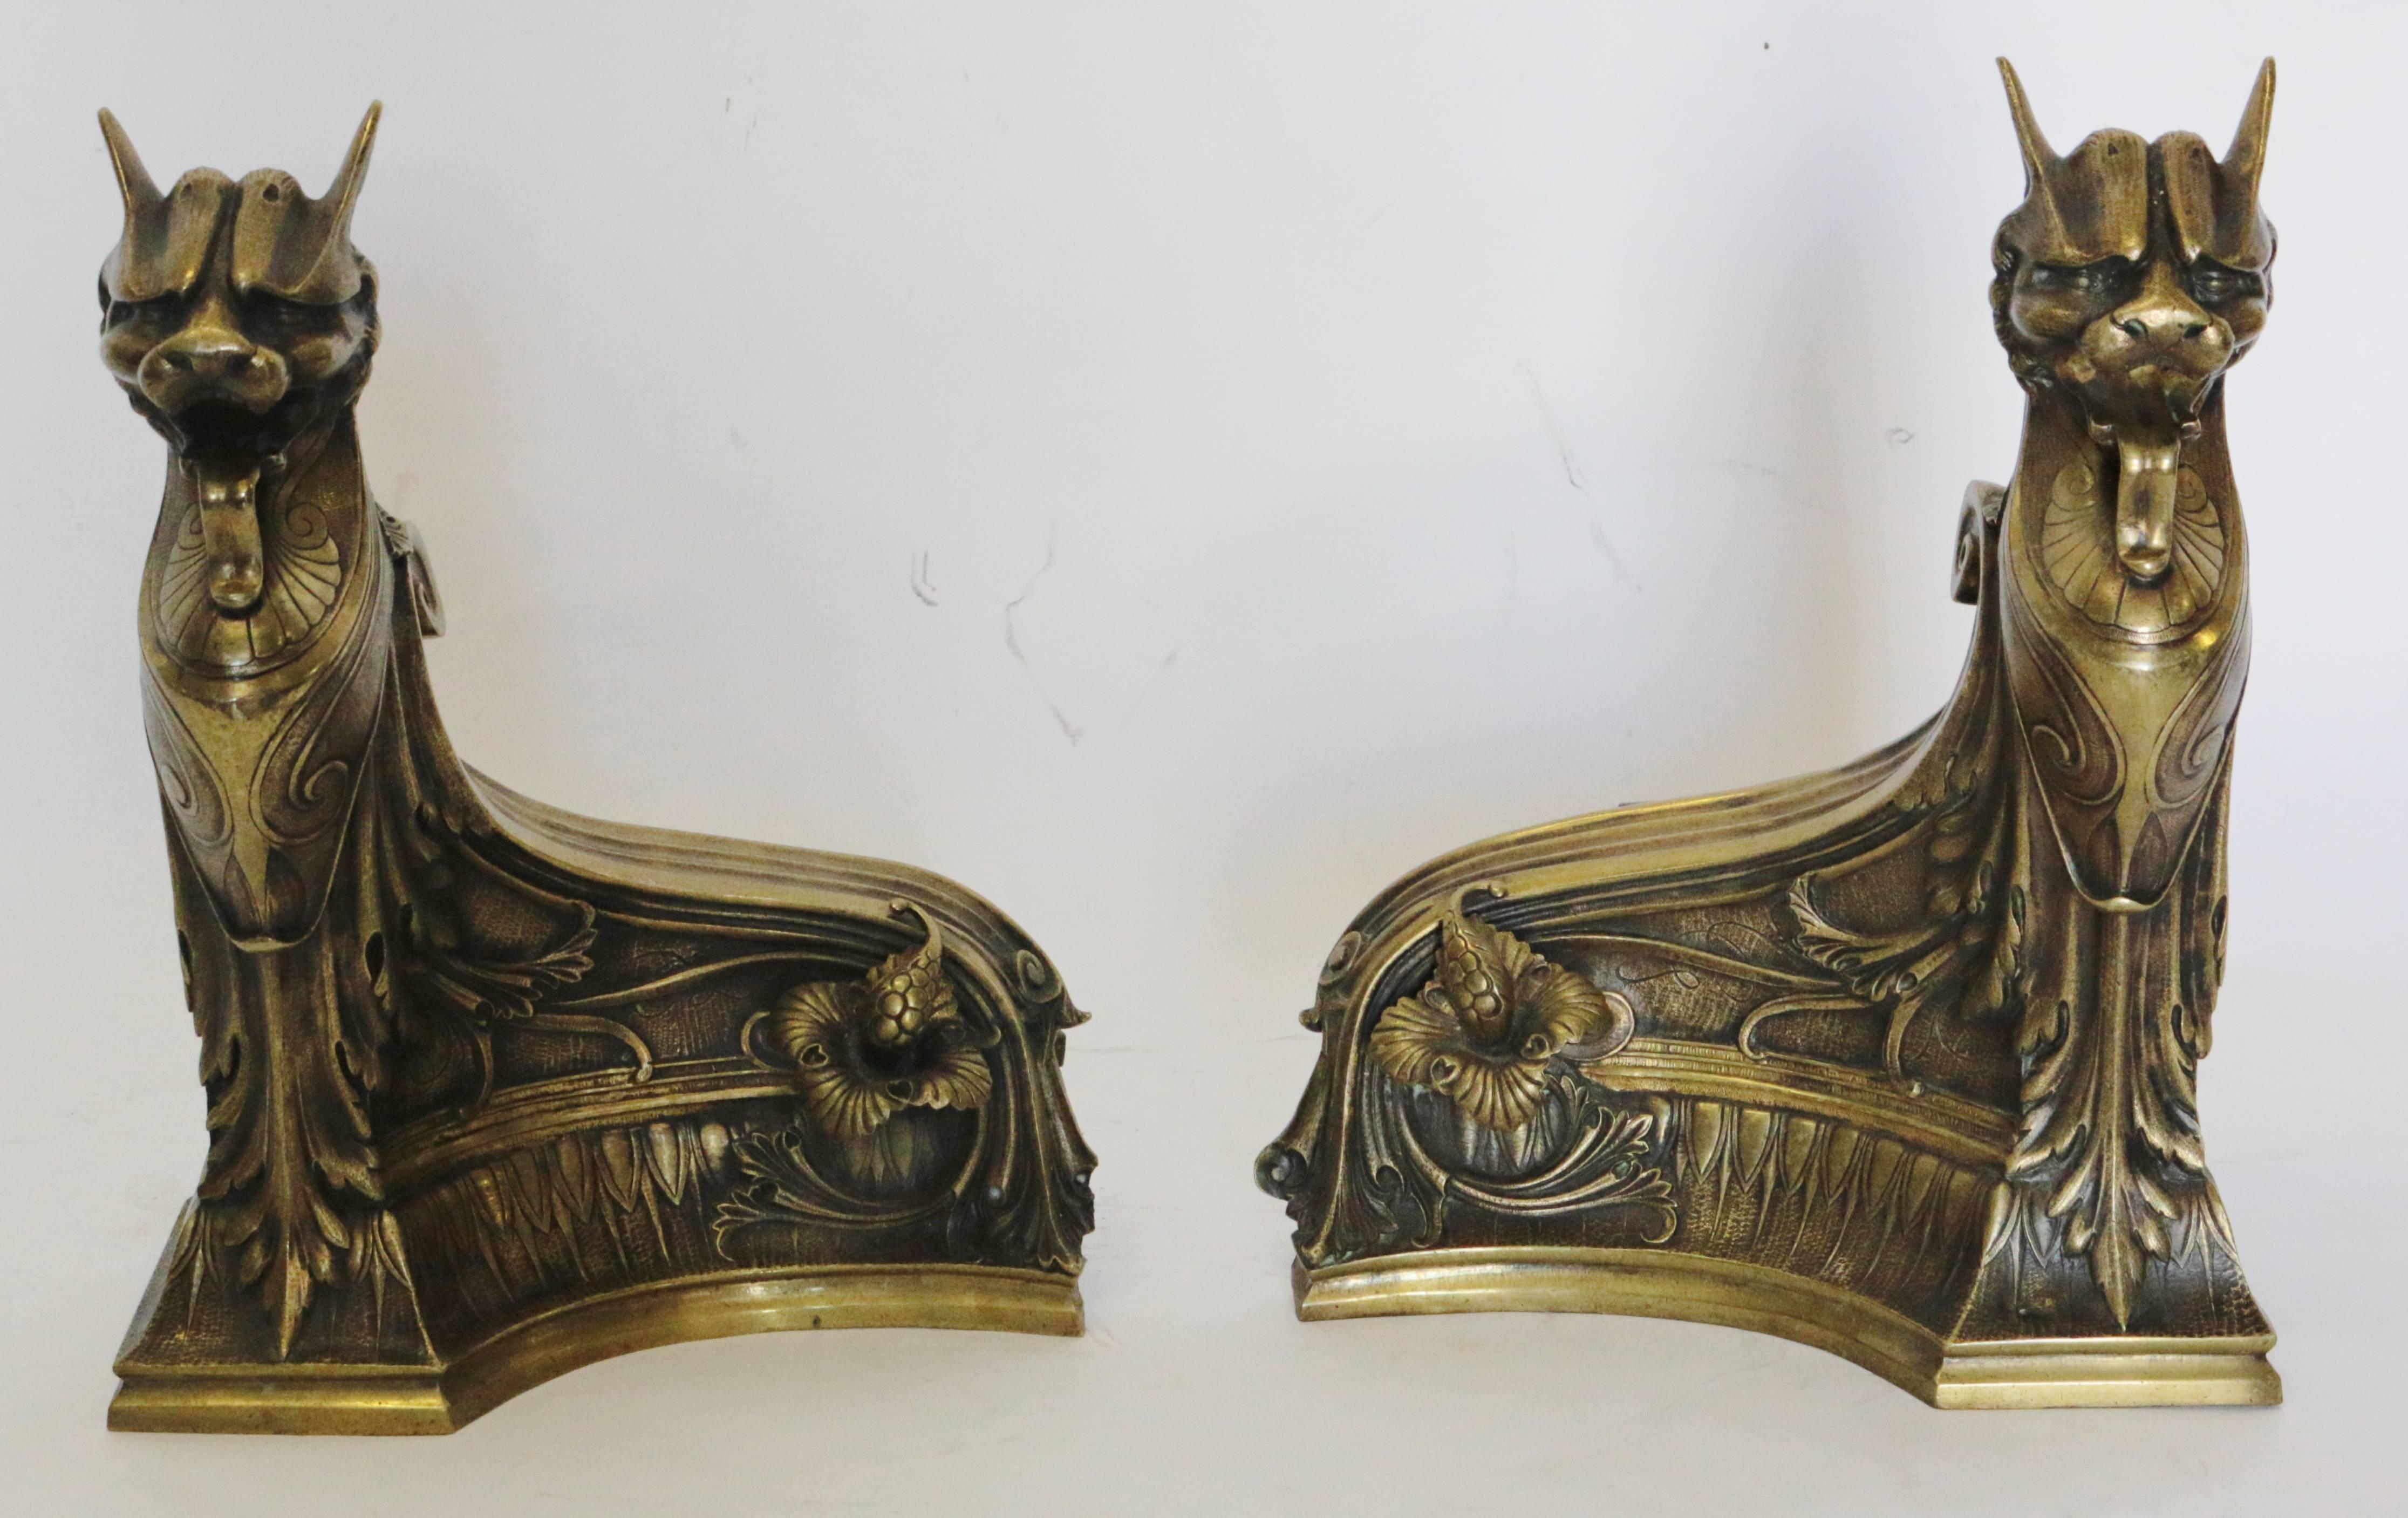 The ultimate Art Nouveau Gargoyle style motif. This amazing pair of French ormolu gargoyle like andirons have extra ordinary detail with great curves. The texture to the facial details provide exceptional feel as well to the chest plate. The drapes